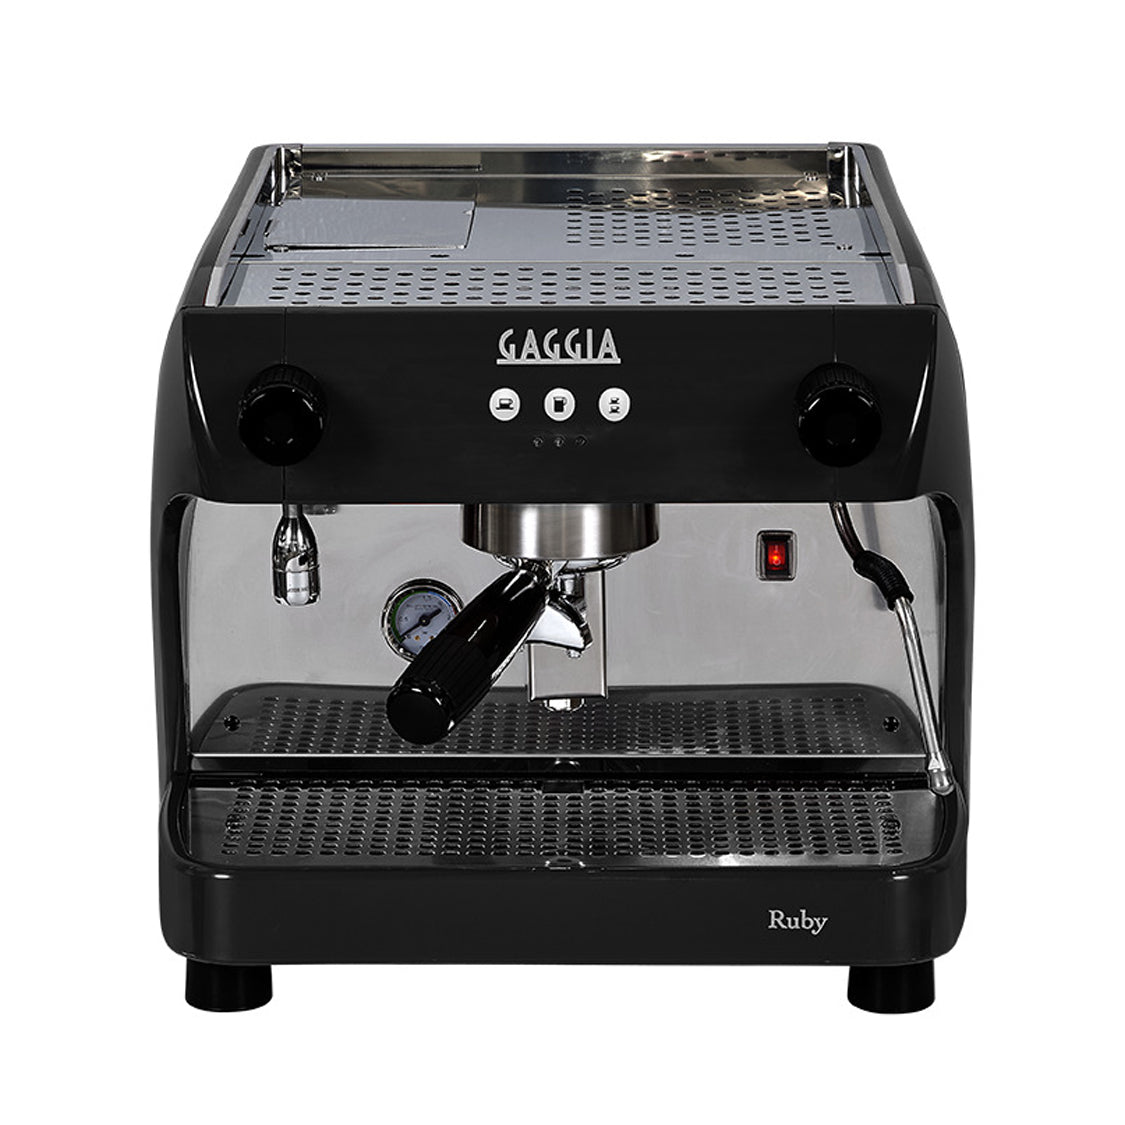 Gaggia Ruby One Group Traditional